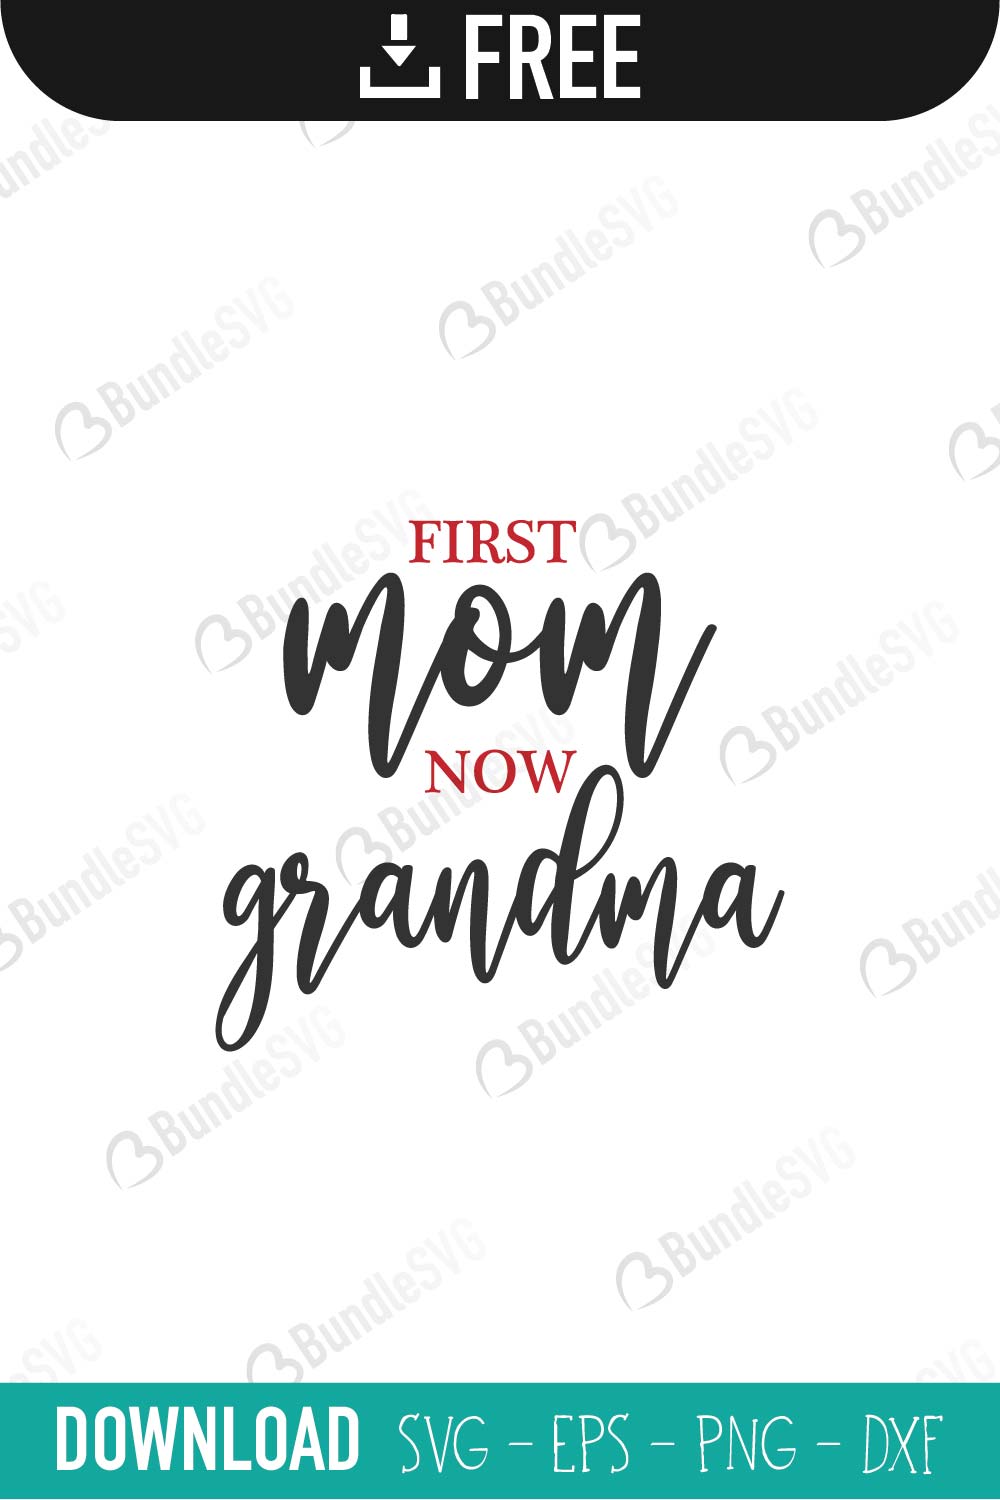 First Mom Now Nana Svg Mothers Day Svg Digital Printable First Mom Now Grandma Svg Drawing Illustration Art Collectibles Colonialgolfhart Com